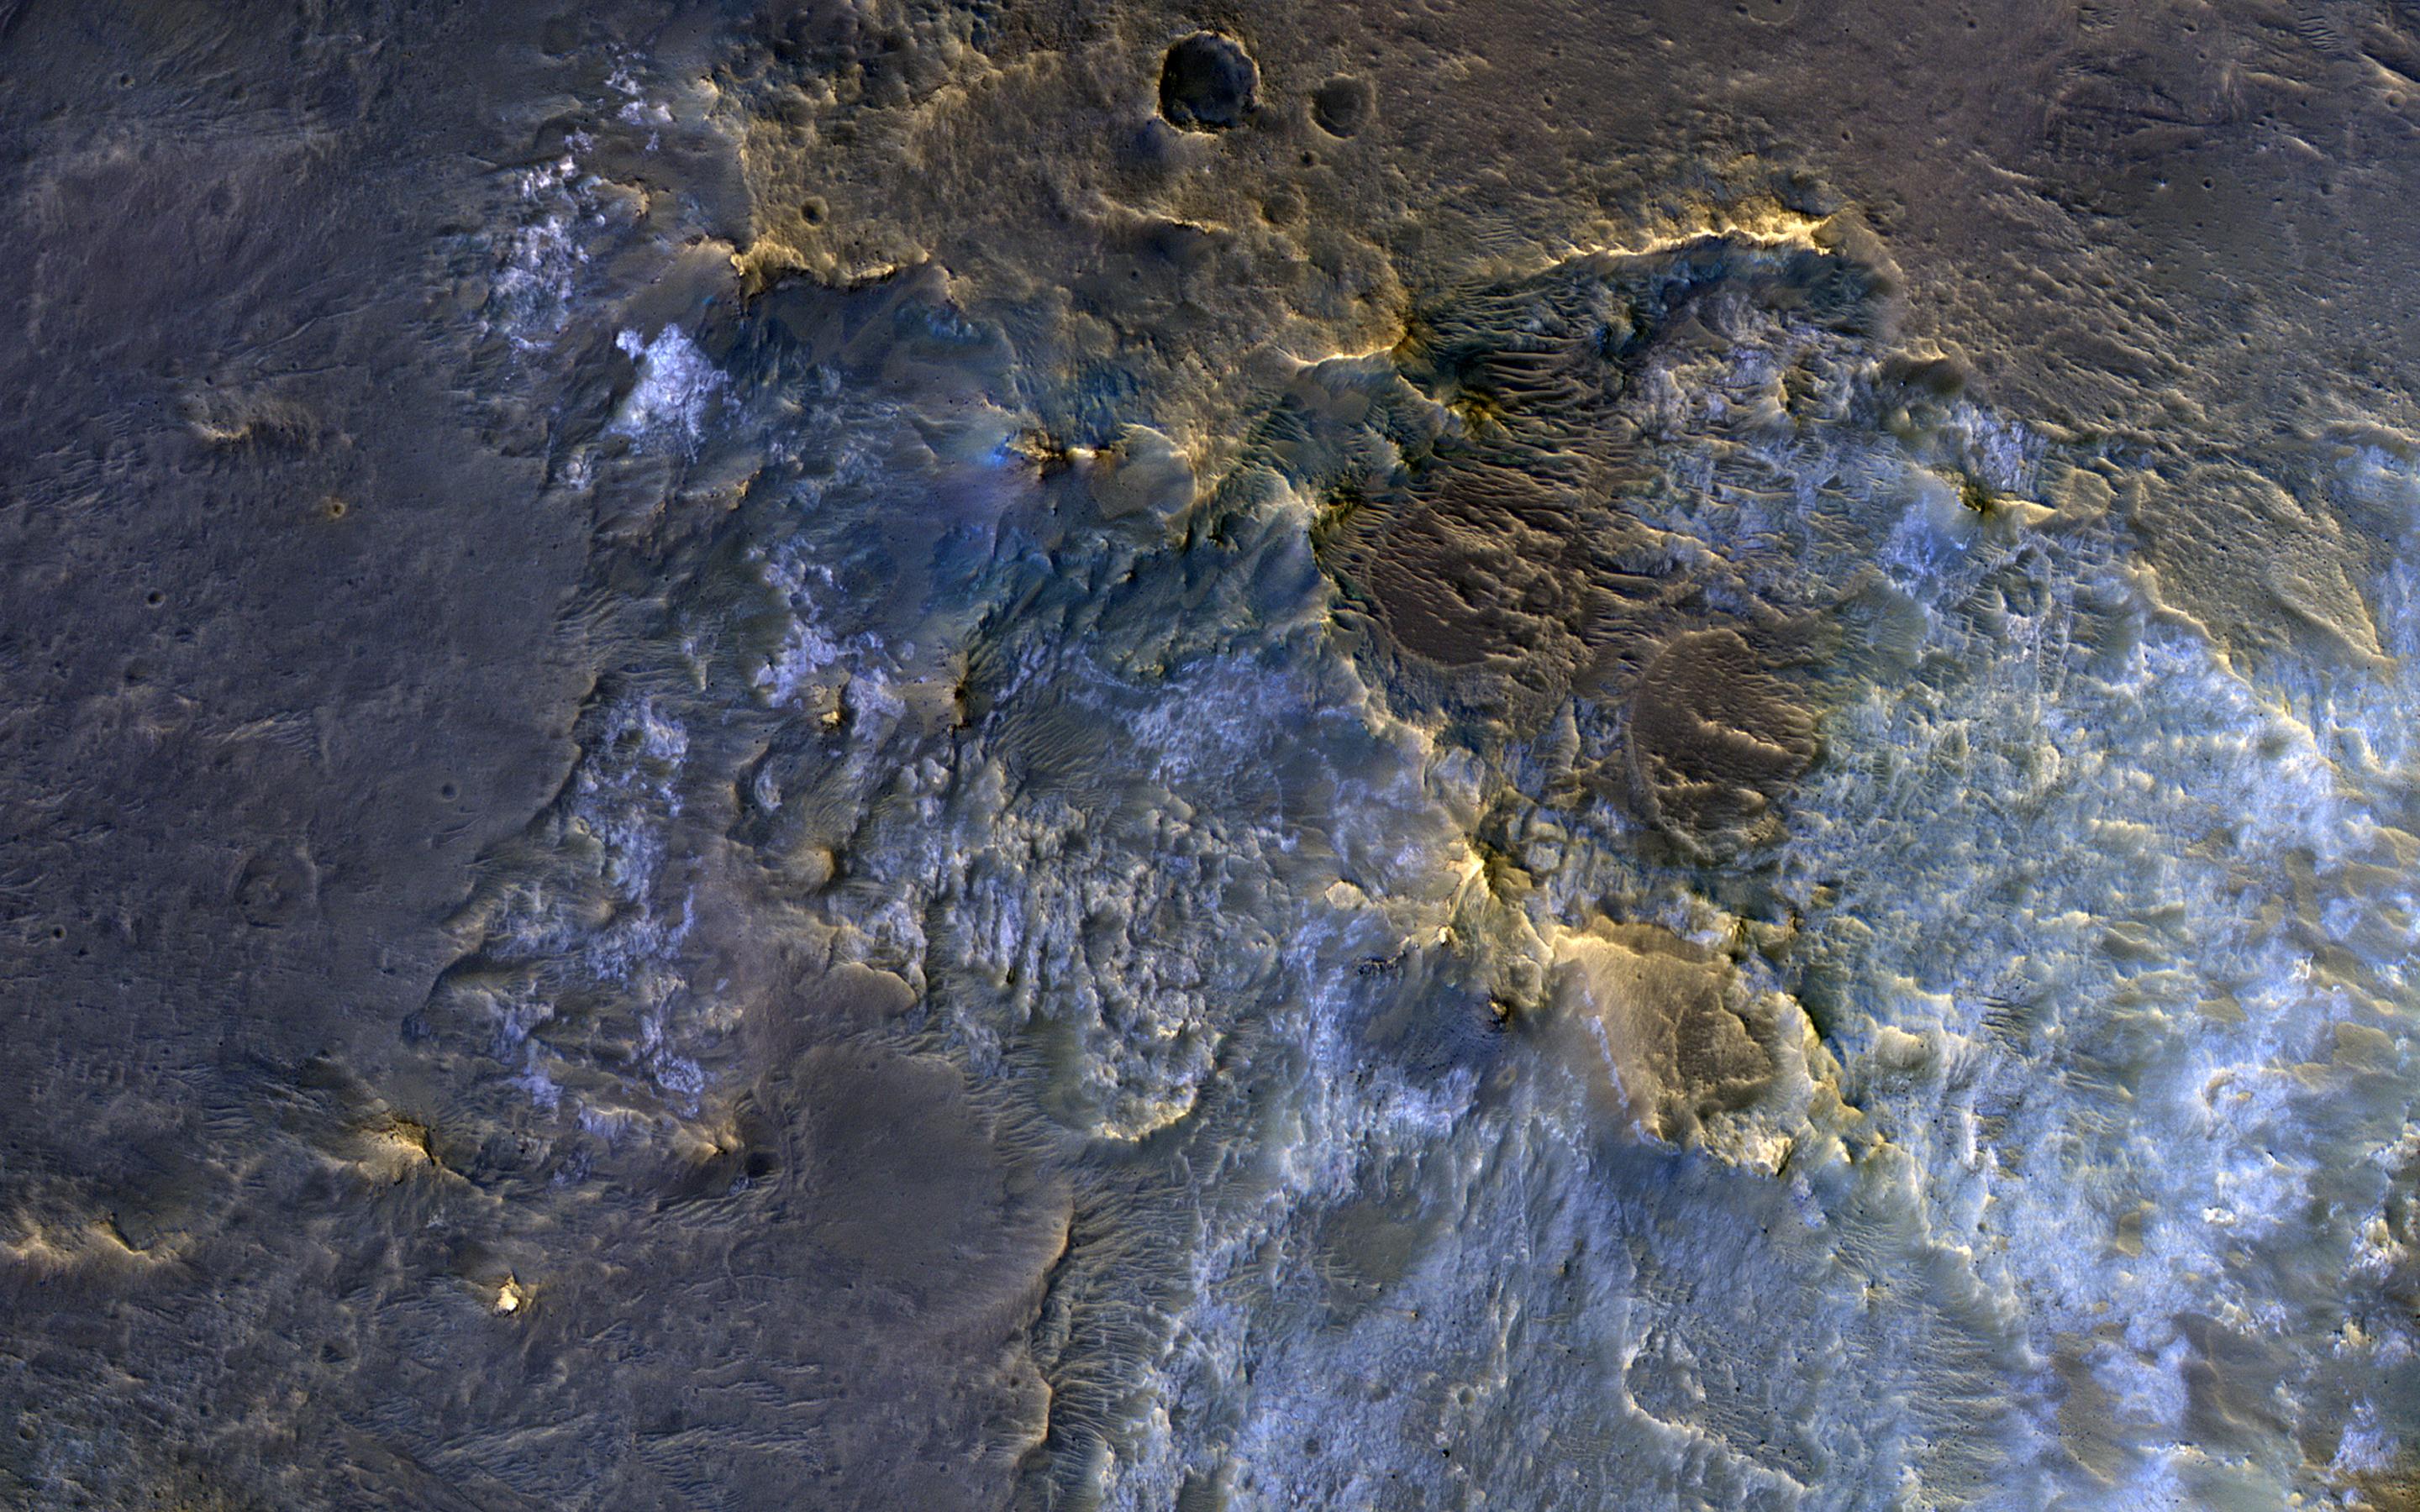 This image acquired on November 30, 2018 by NASAs Mars Reconnaissance Orbiter, shows a complex crater, where we see bedrock in several locations from different depths in the crust.